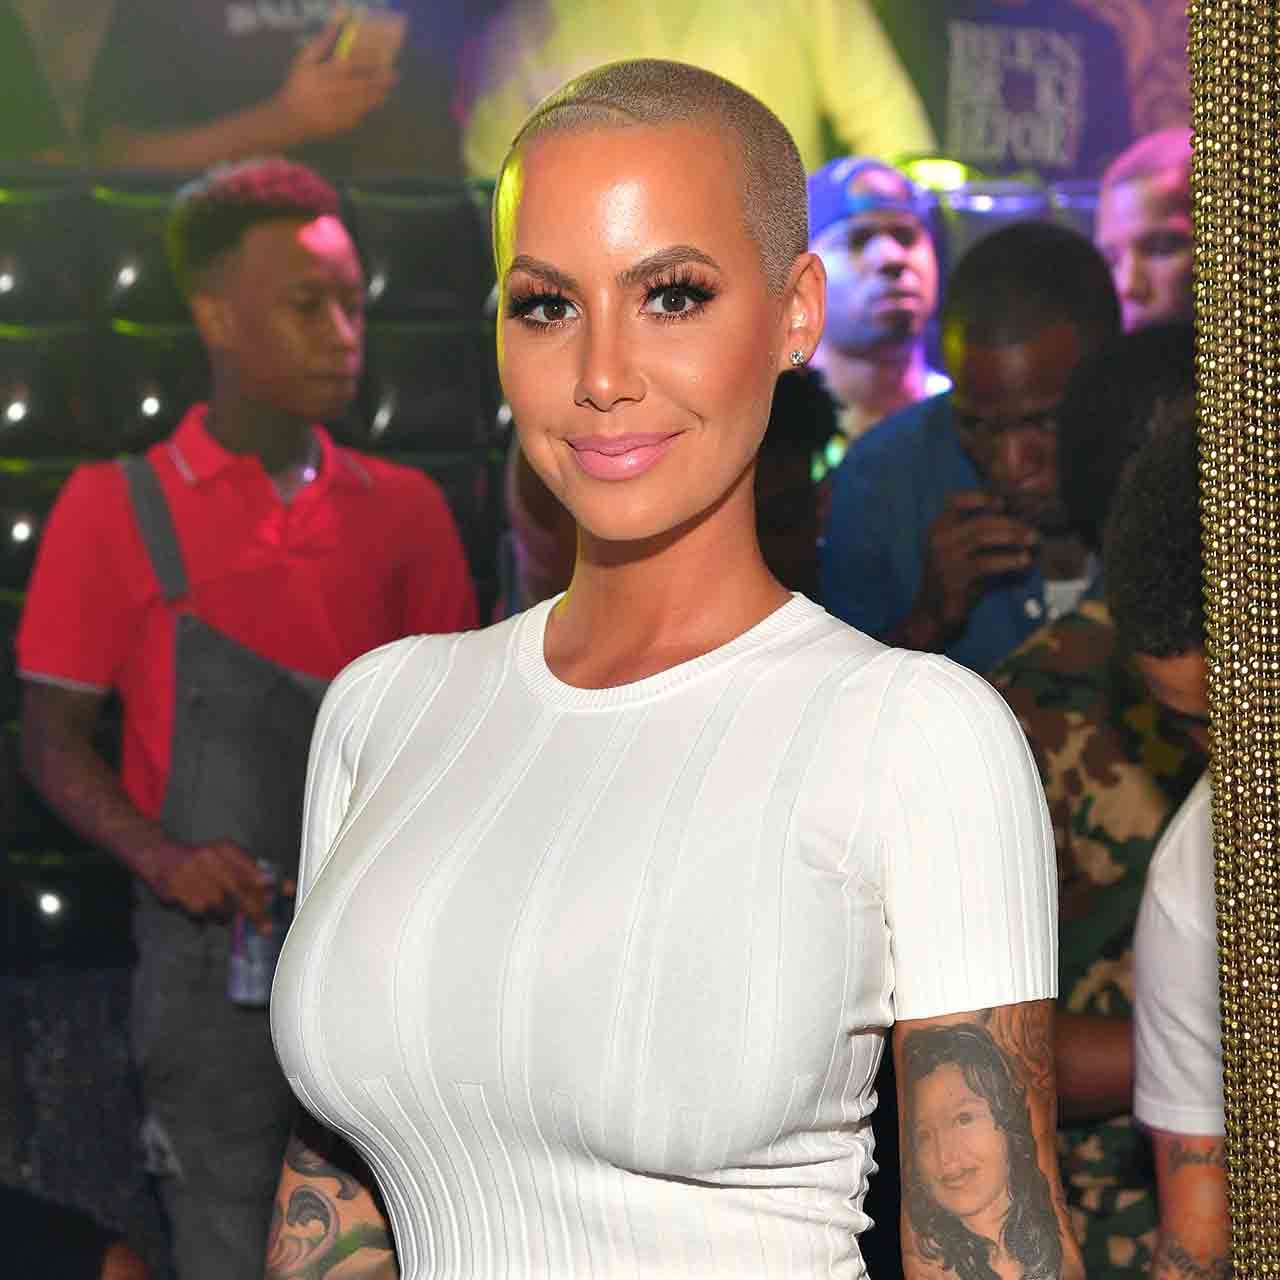 ainsley cumberbatch recommends amber rose gets fucked pic